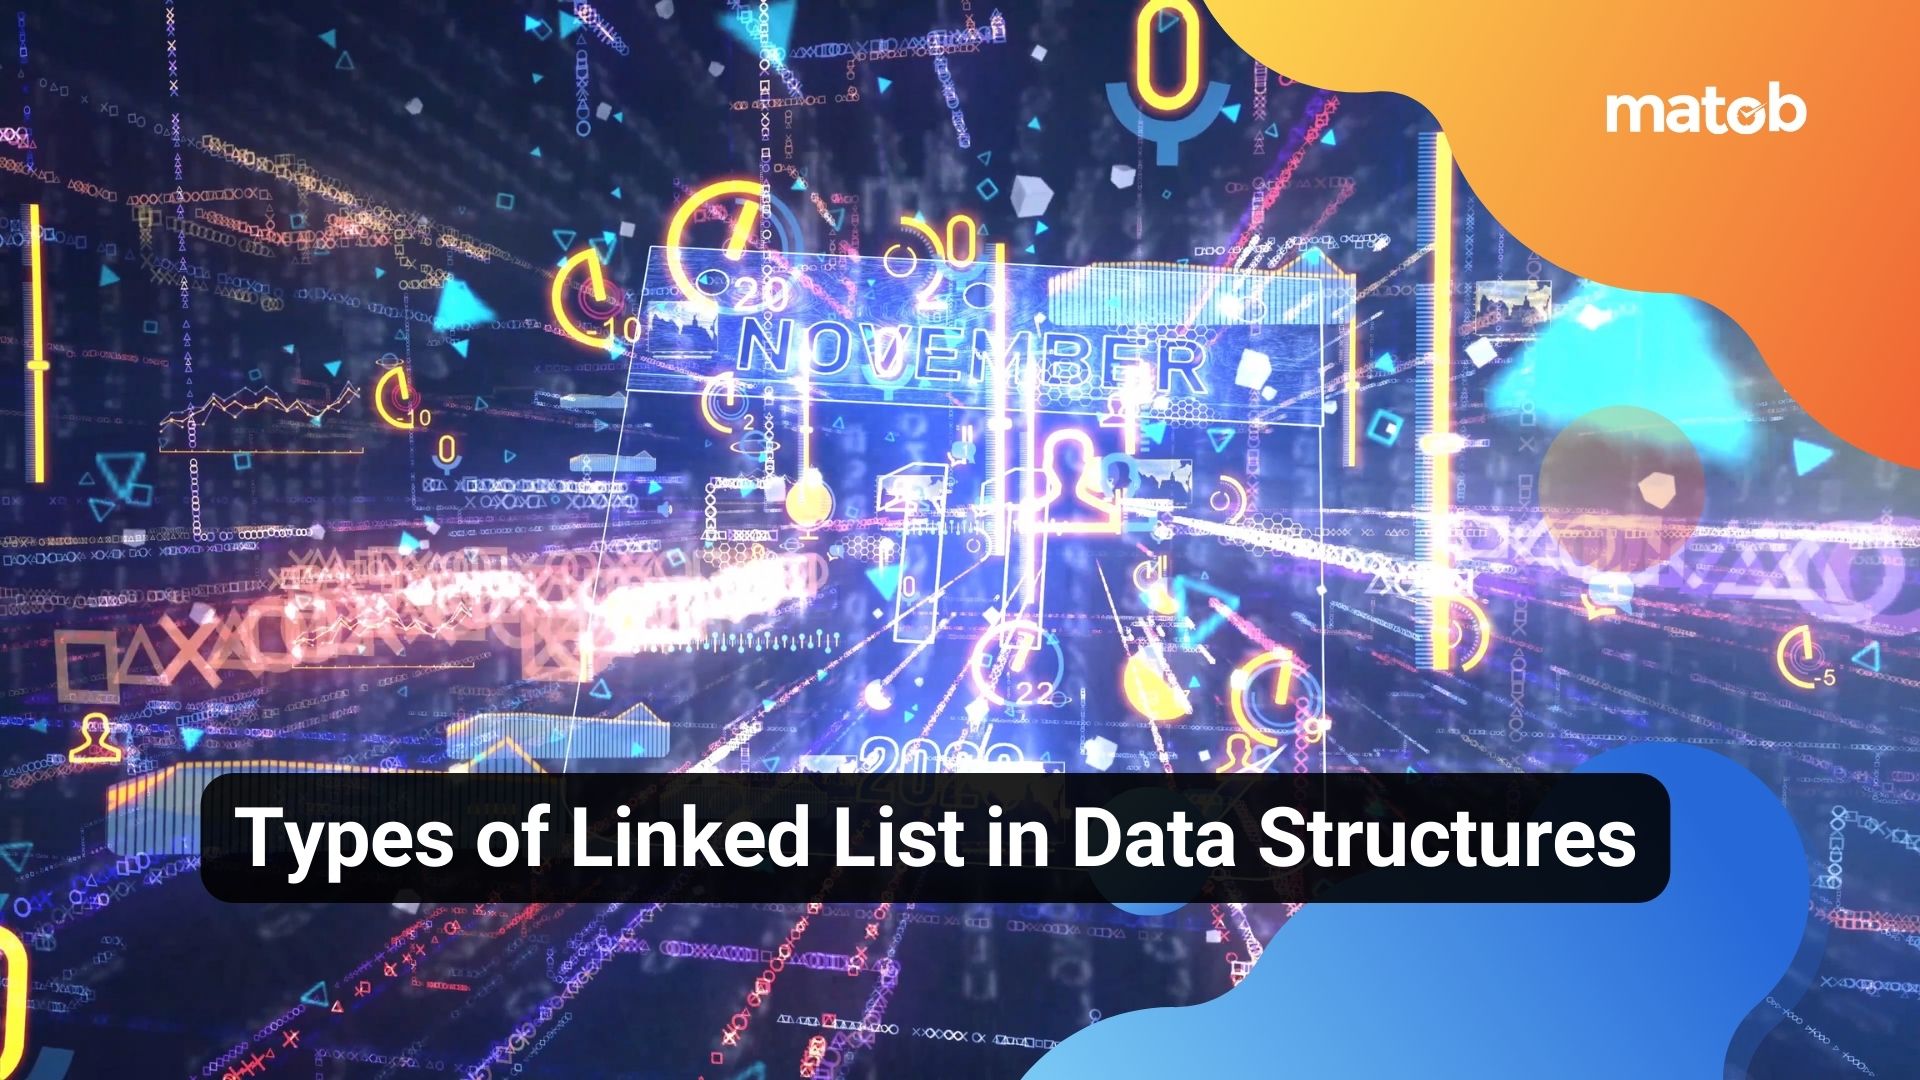 Types of Linked List in Data Structures